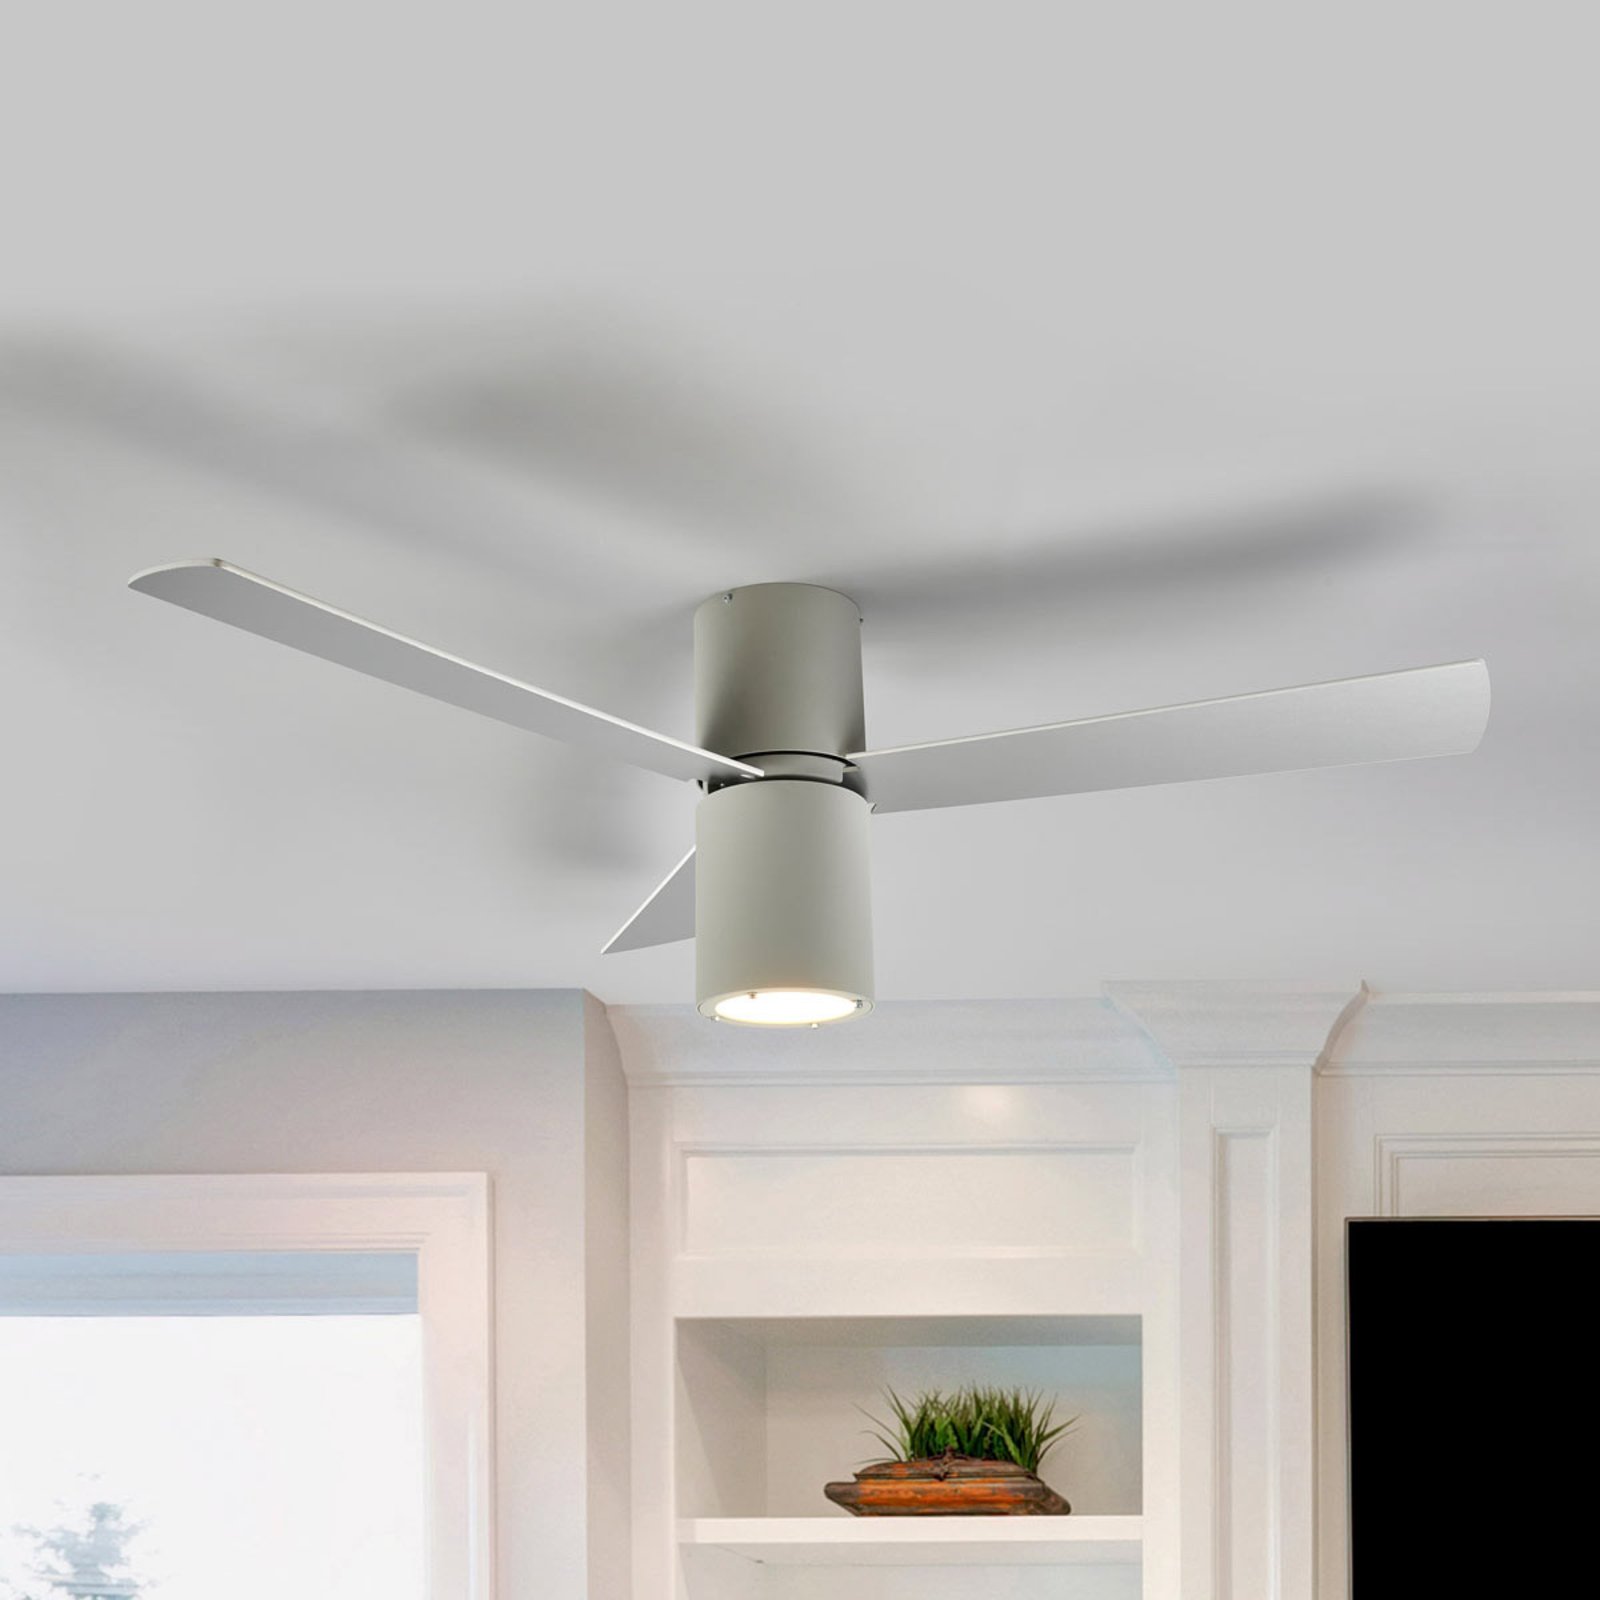 FORMENTERA ceiling fan with remote control